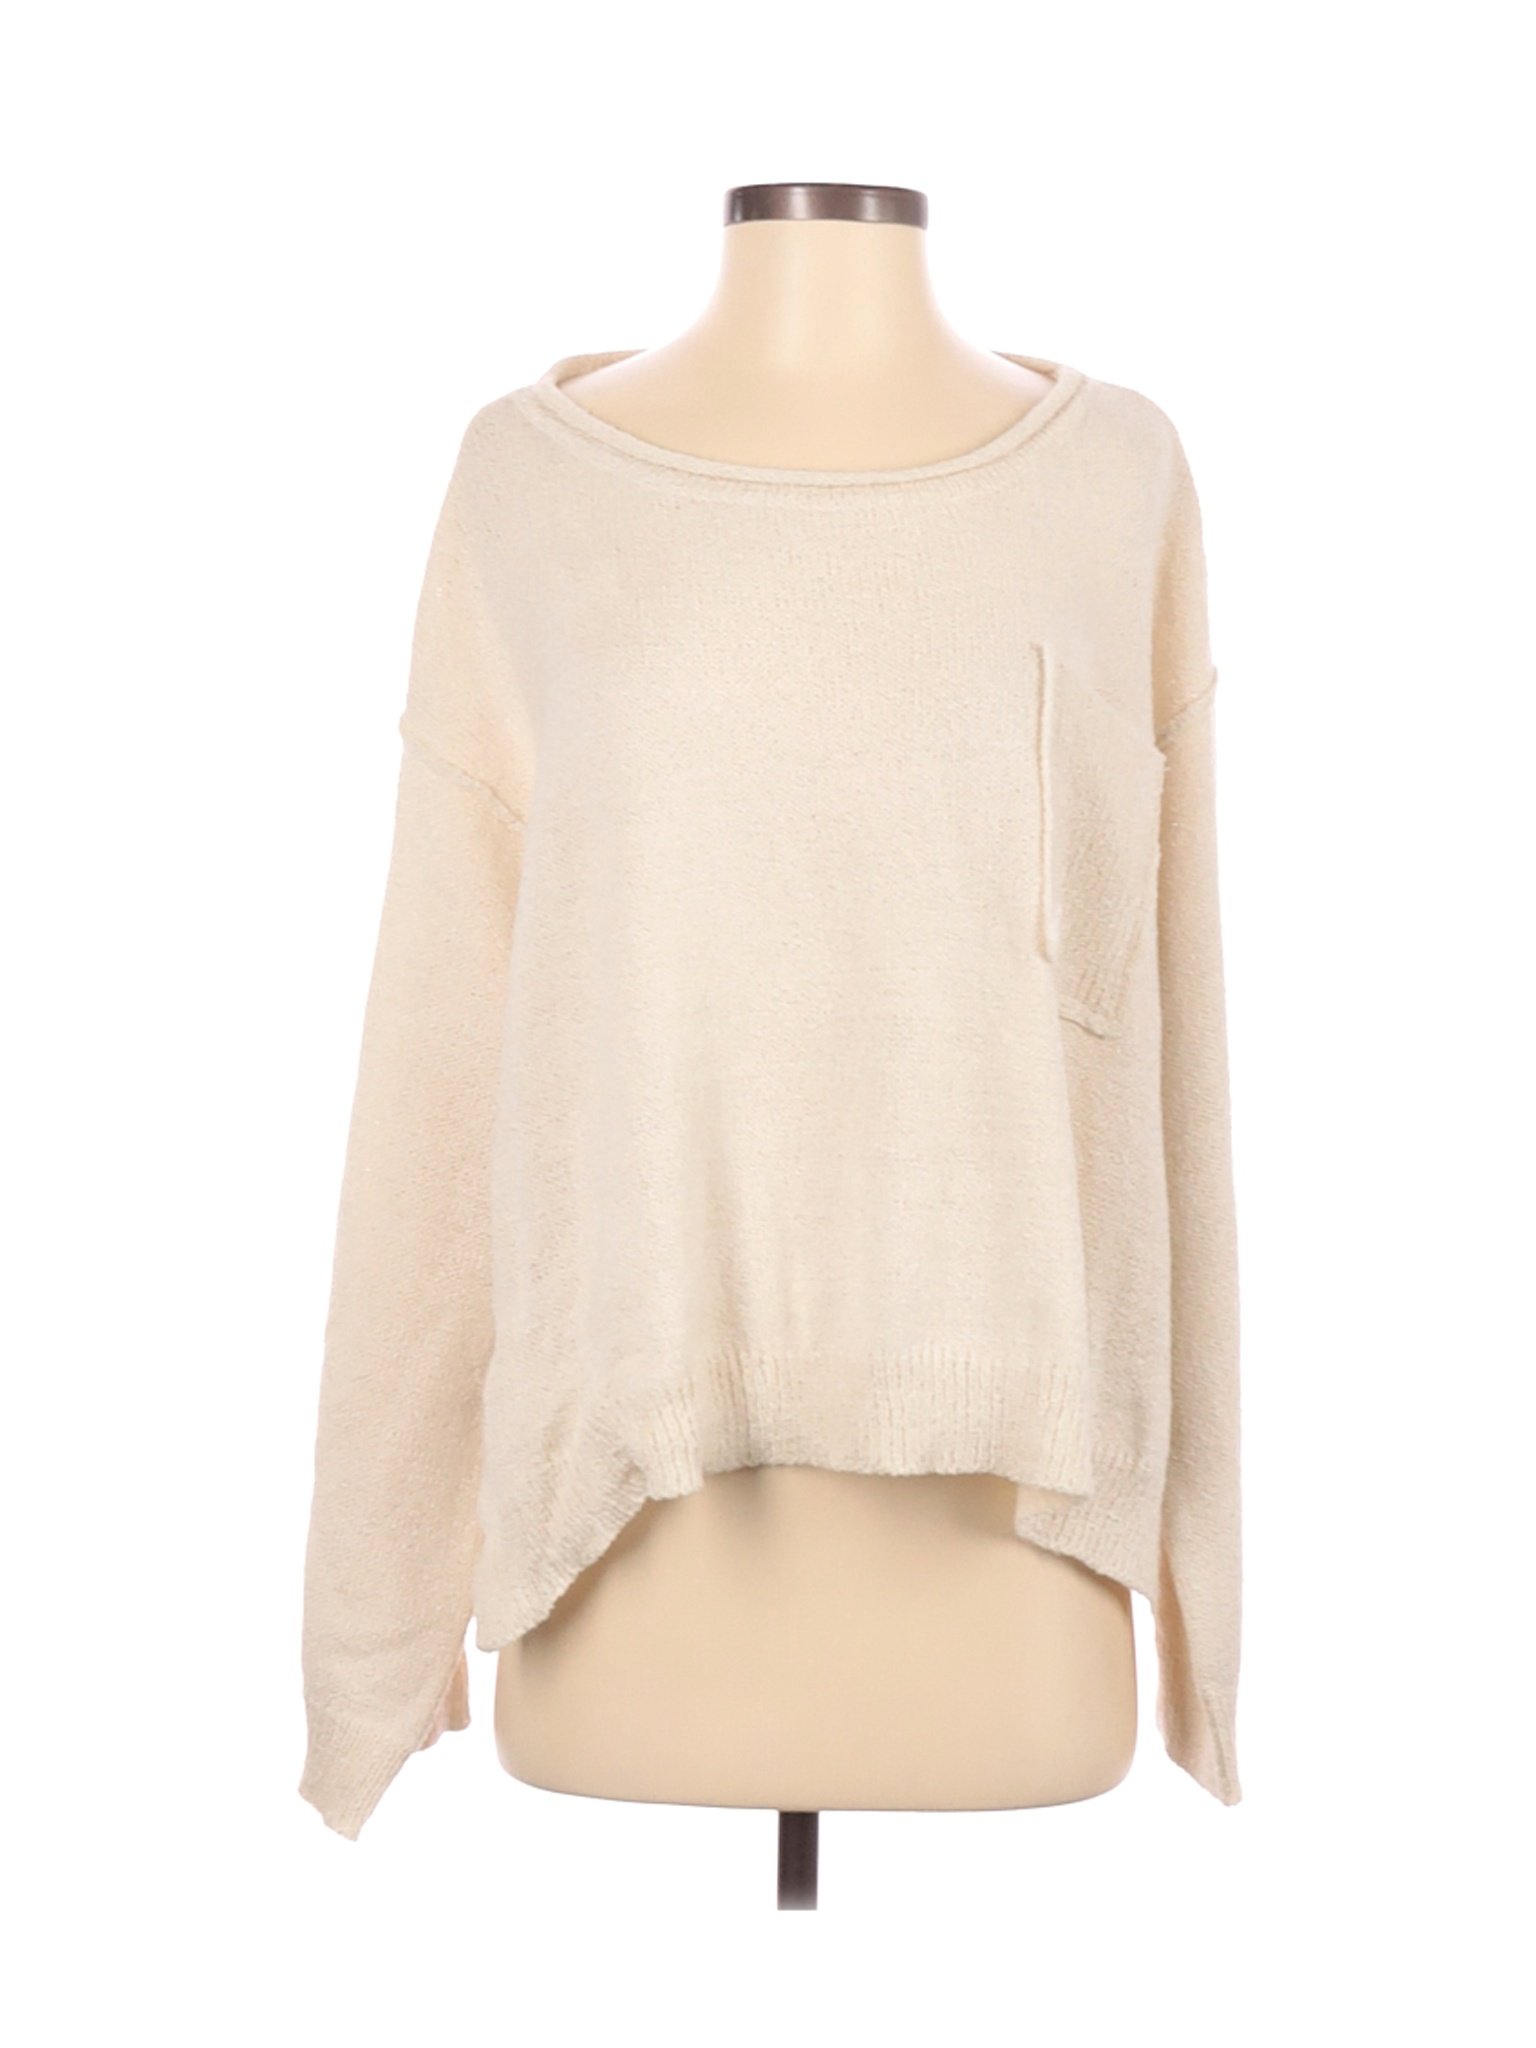 Wishlist 100% Acrylic Solid Tan Ivory Pullover Sweater Size Sm - Med ...